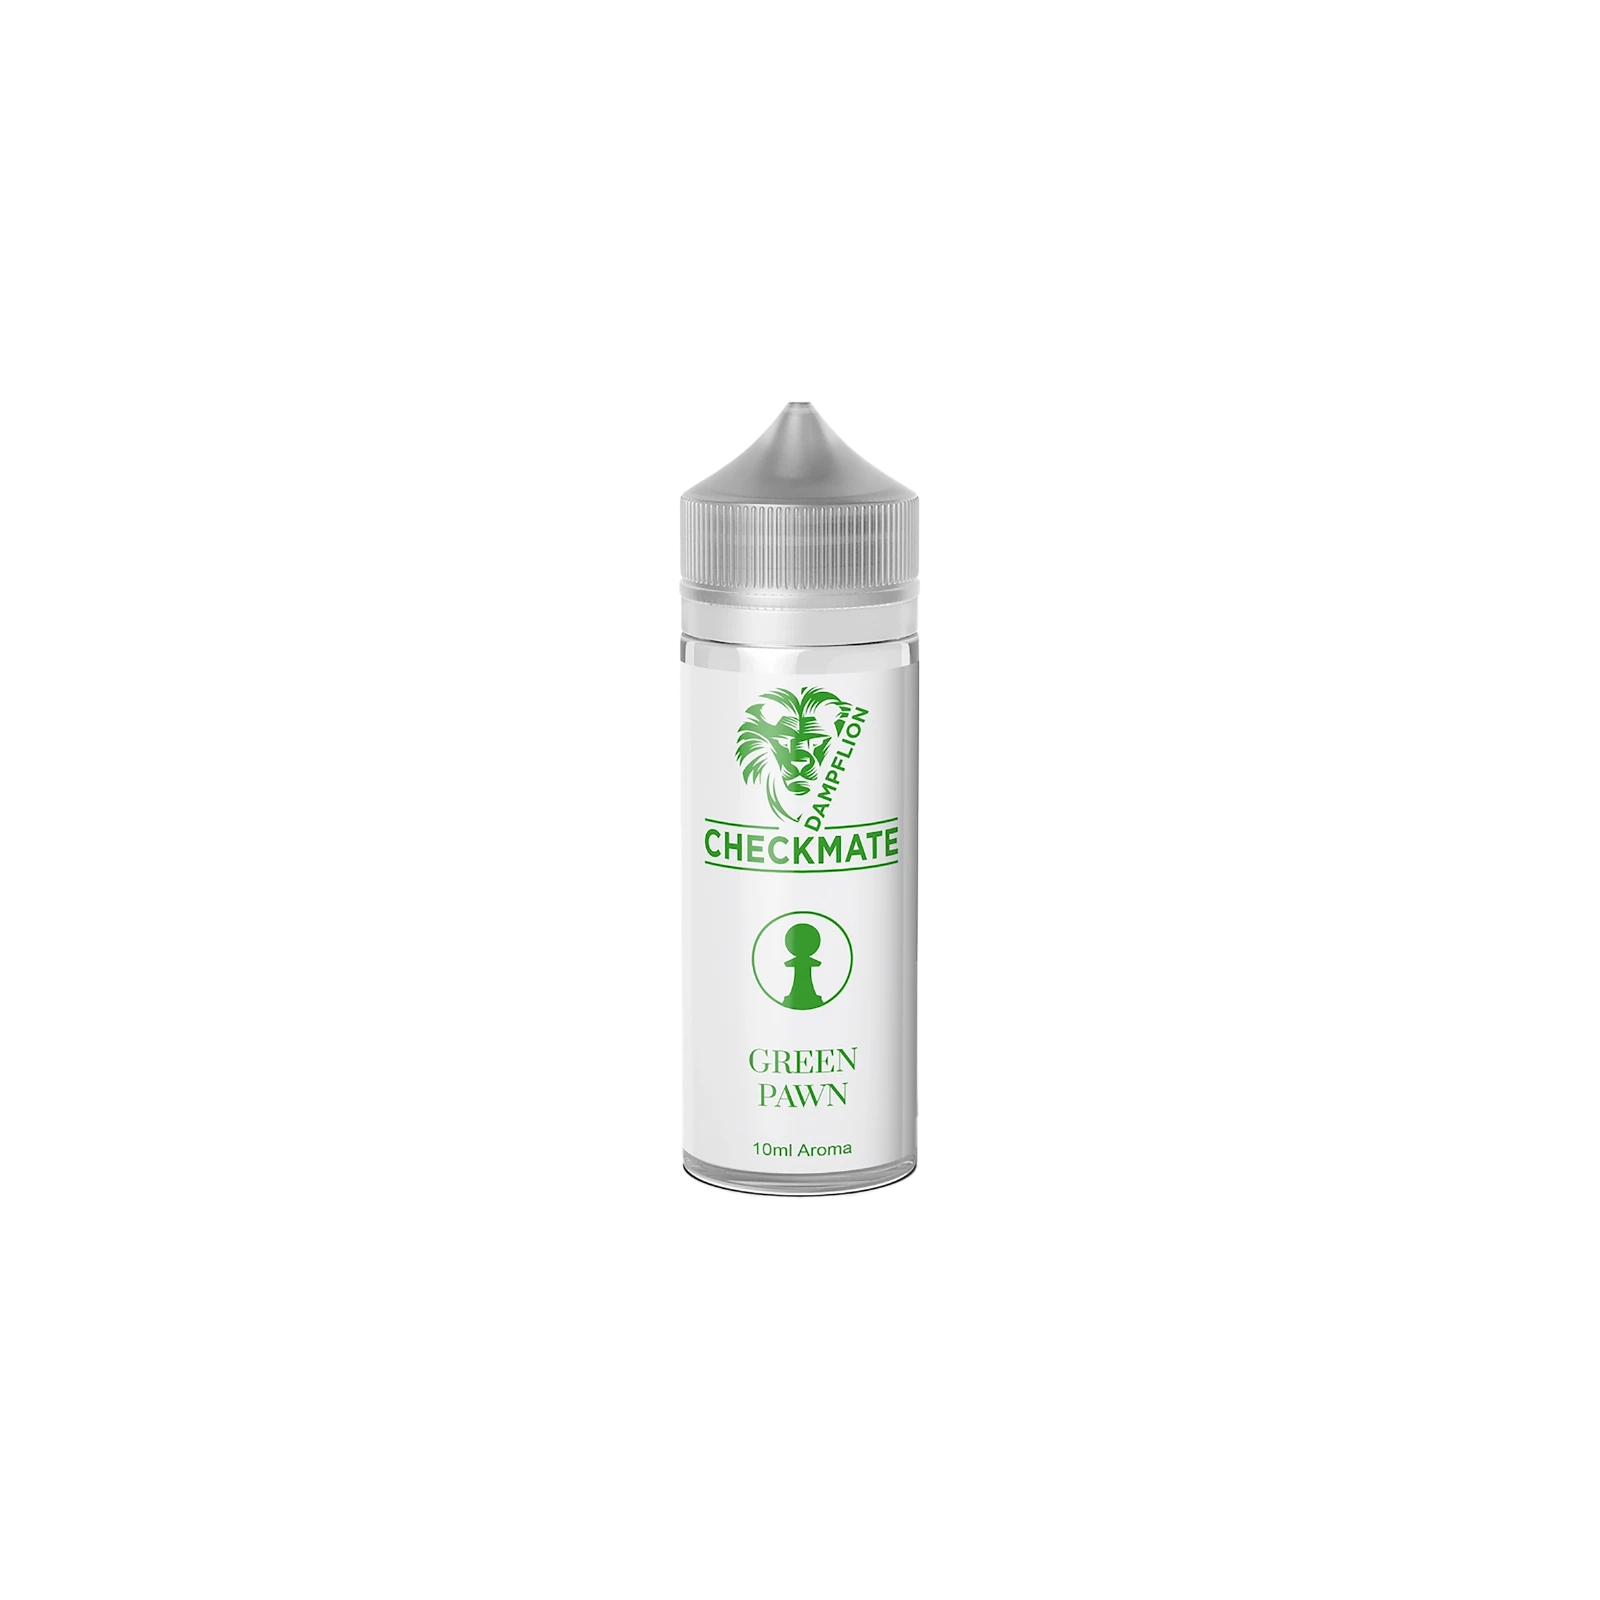 Dampflion Checkmate Aroma Longfill Green Pawn 10ml